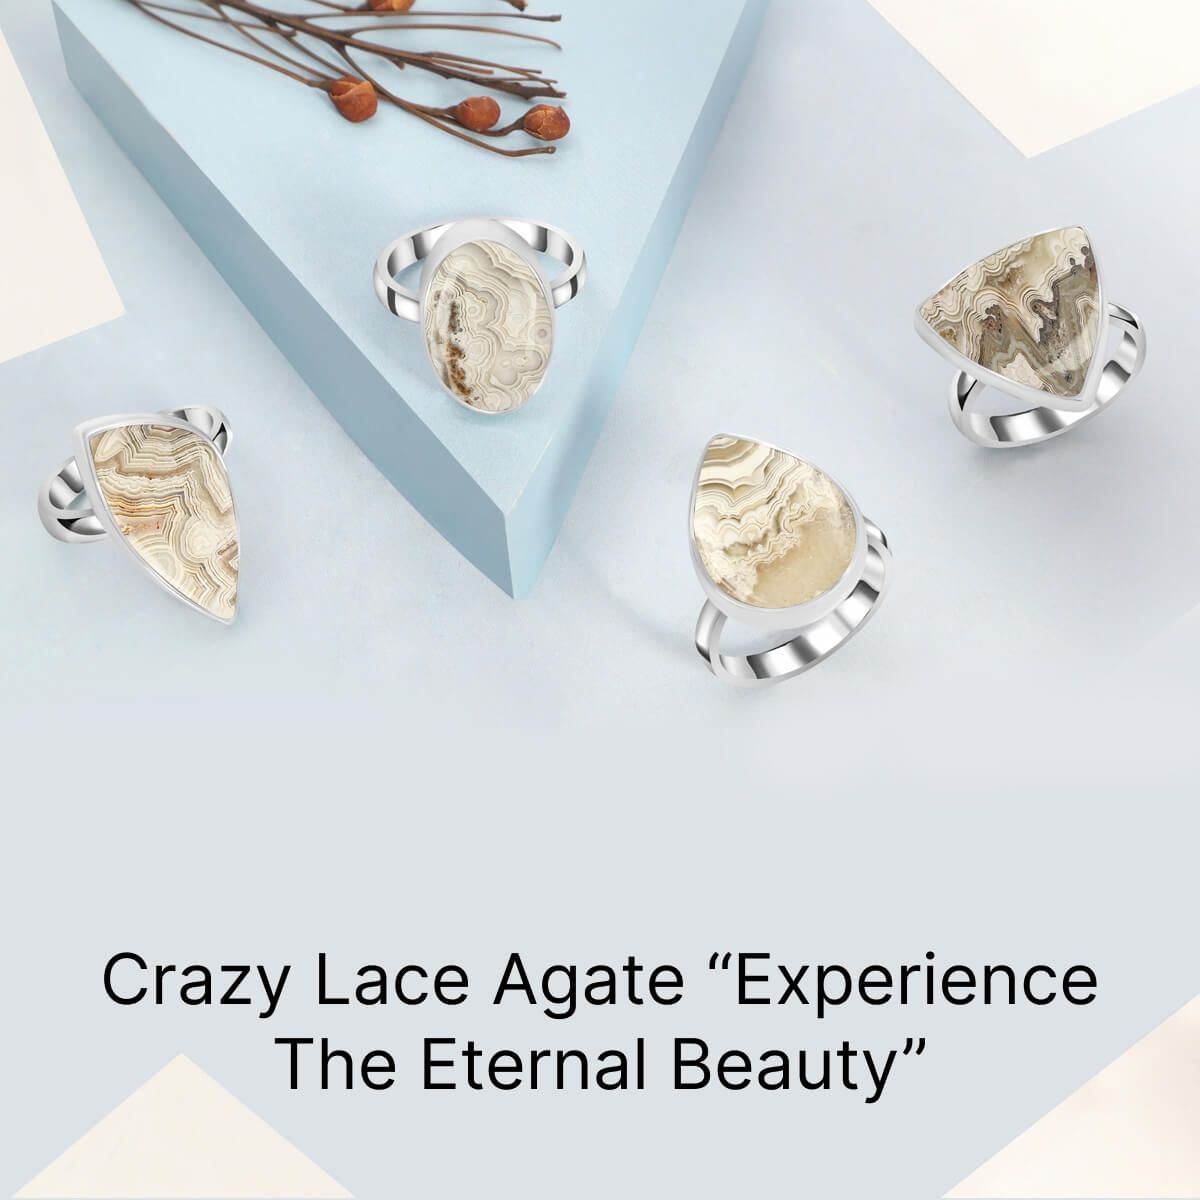 History Of Crazy Lace Agate Jewelry